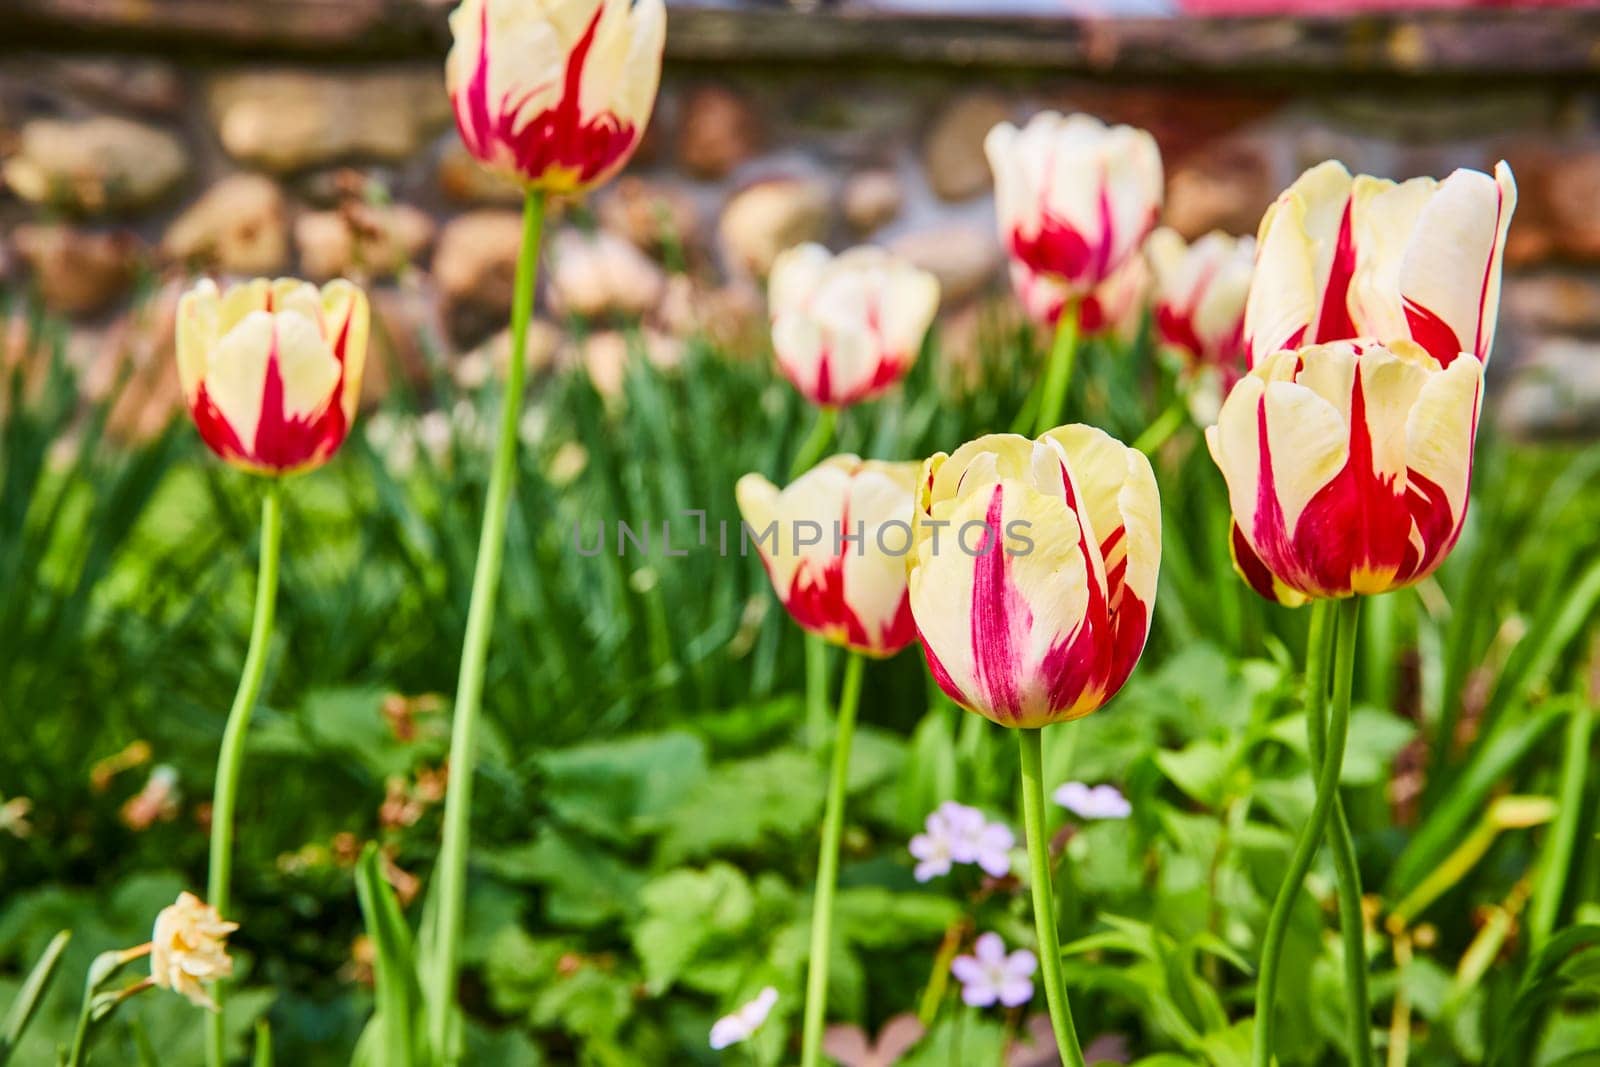 Vibrant red and yellow tulips bloom in Warsaw Biblical Gardens, capturing the essence of spring.